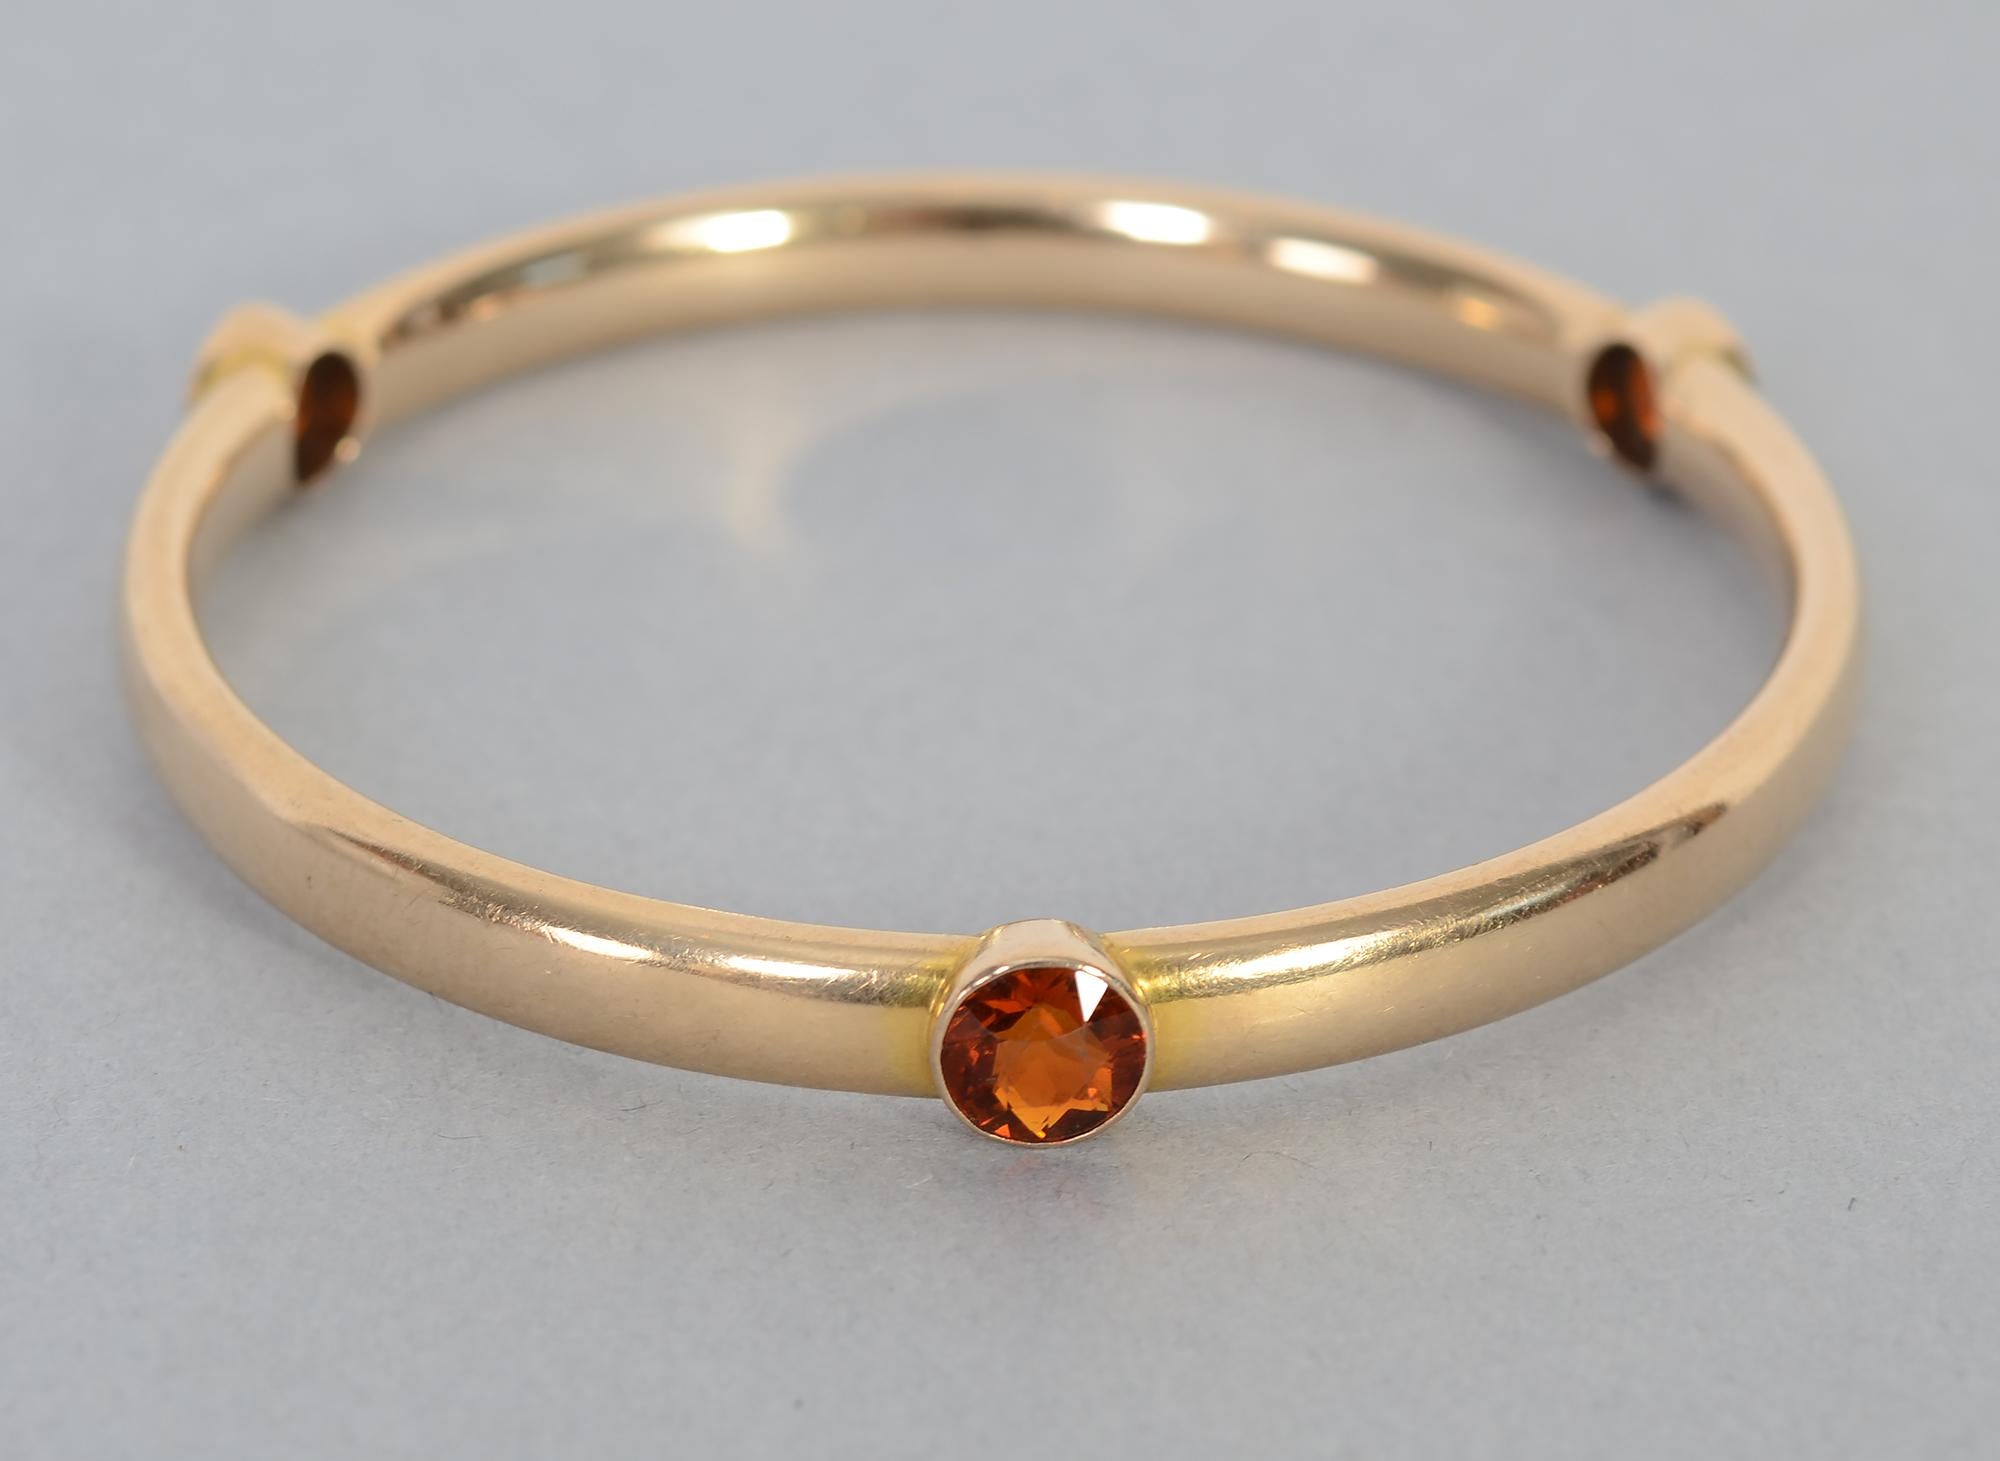 What makes this classic 14 karat gold bangle bracelet unusual are the three faceted citrine stones spaced throughout it.
Each stone is 1/4